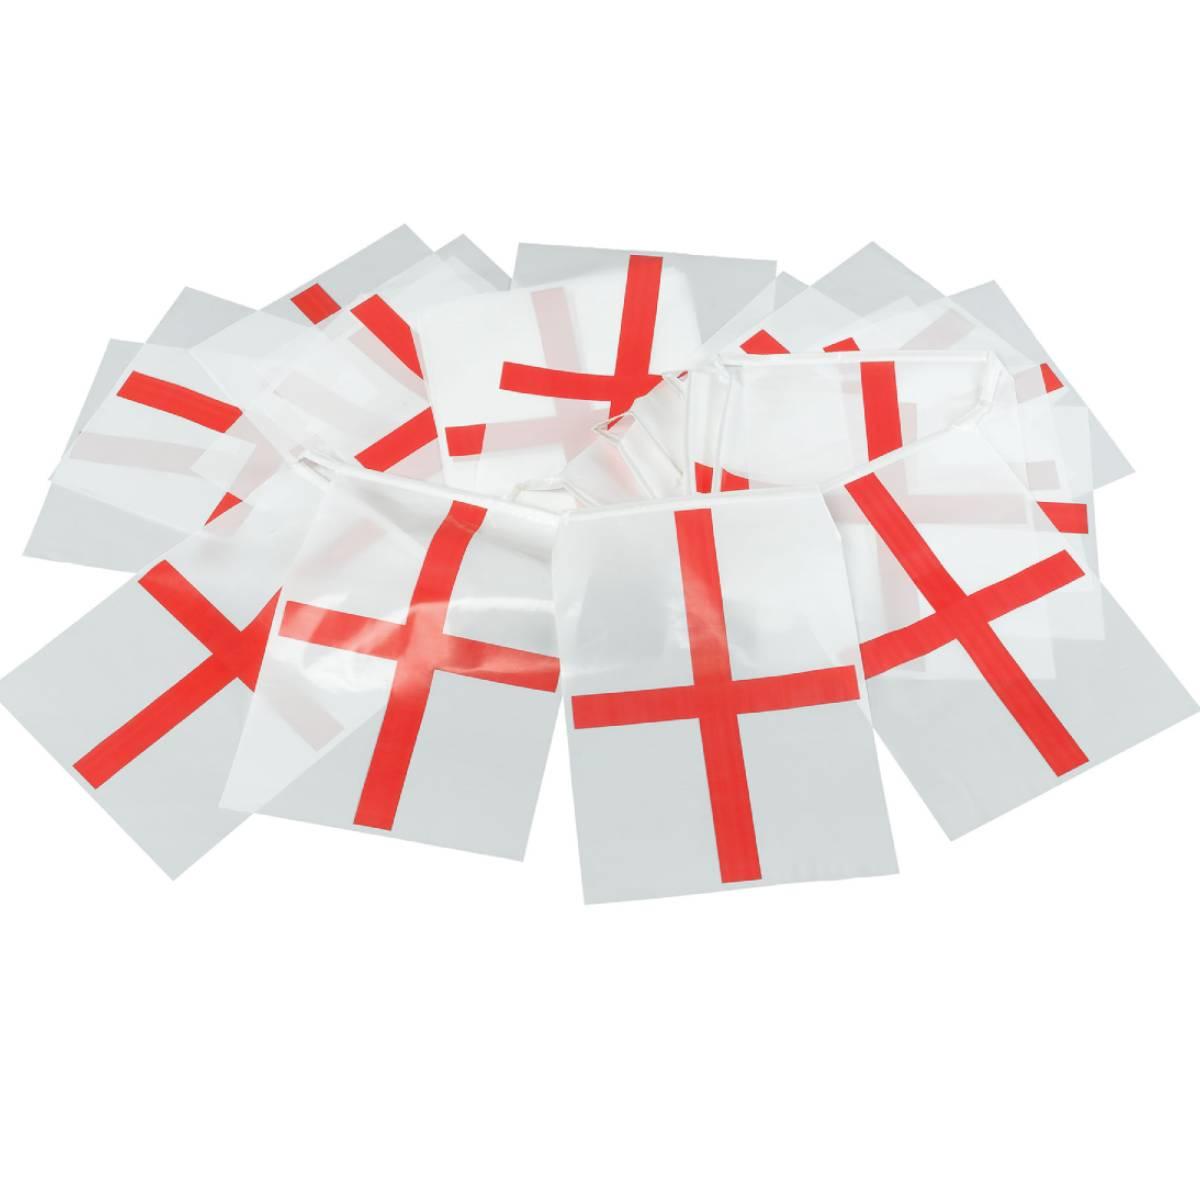 St George's Flag Bunting 7m Long with 25 flags 12" x 8" in size. By Bristol Novelties PG022 this is available from Karnival Costumes online party shop